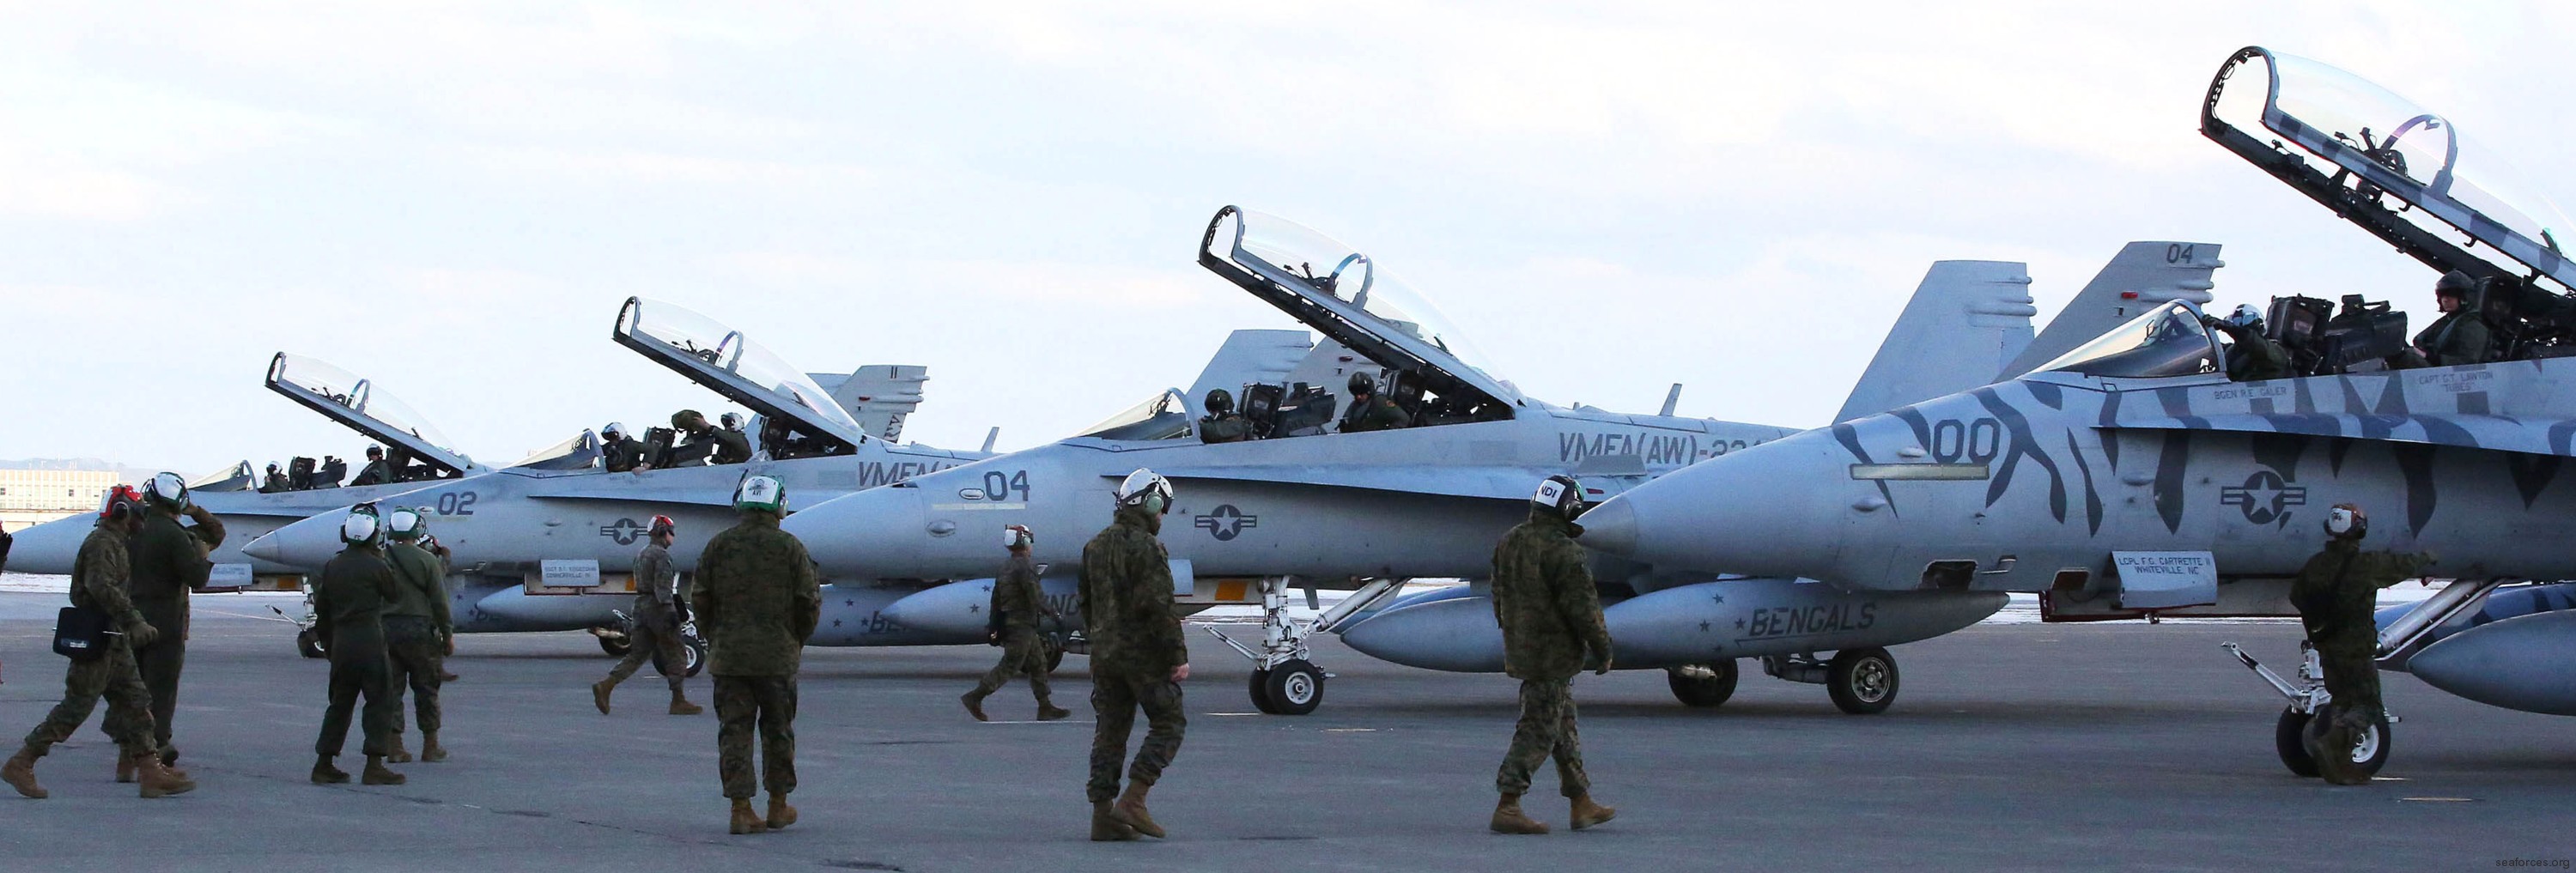 vmfa(aw)-224 bengals marine fighter attack squadron usmc f/a-18d hornet 32